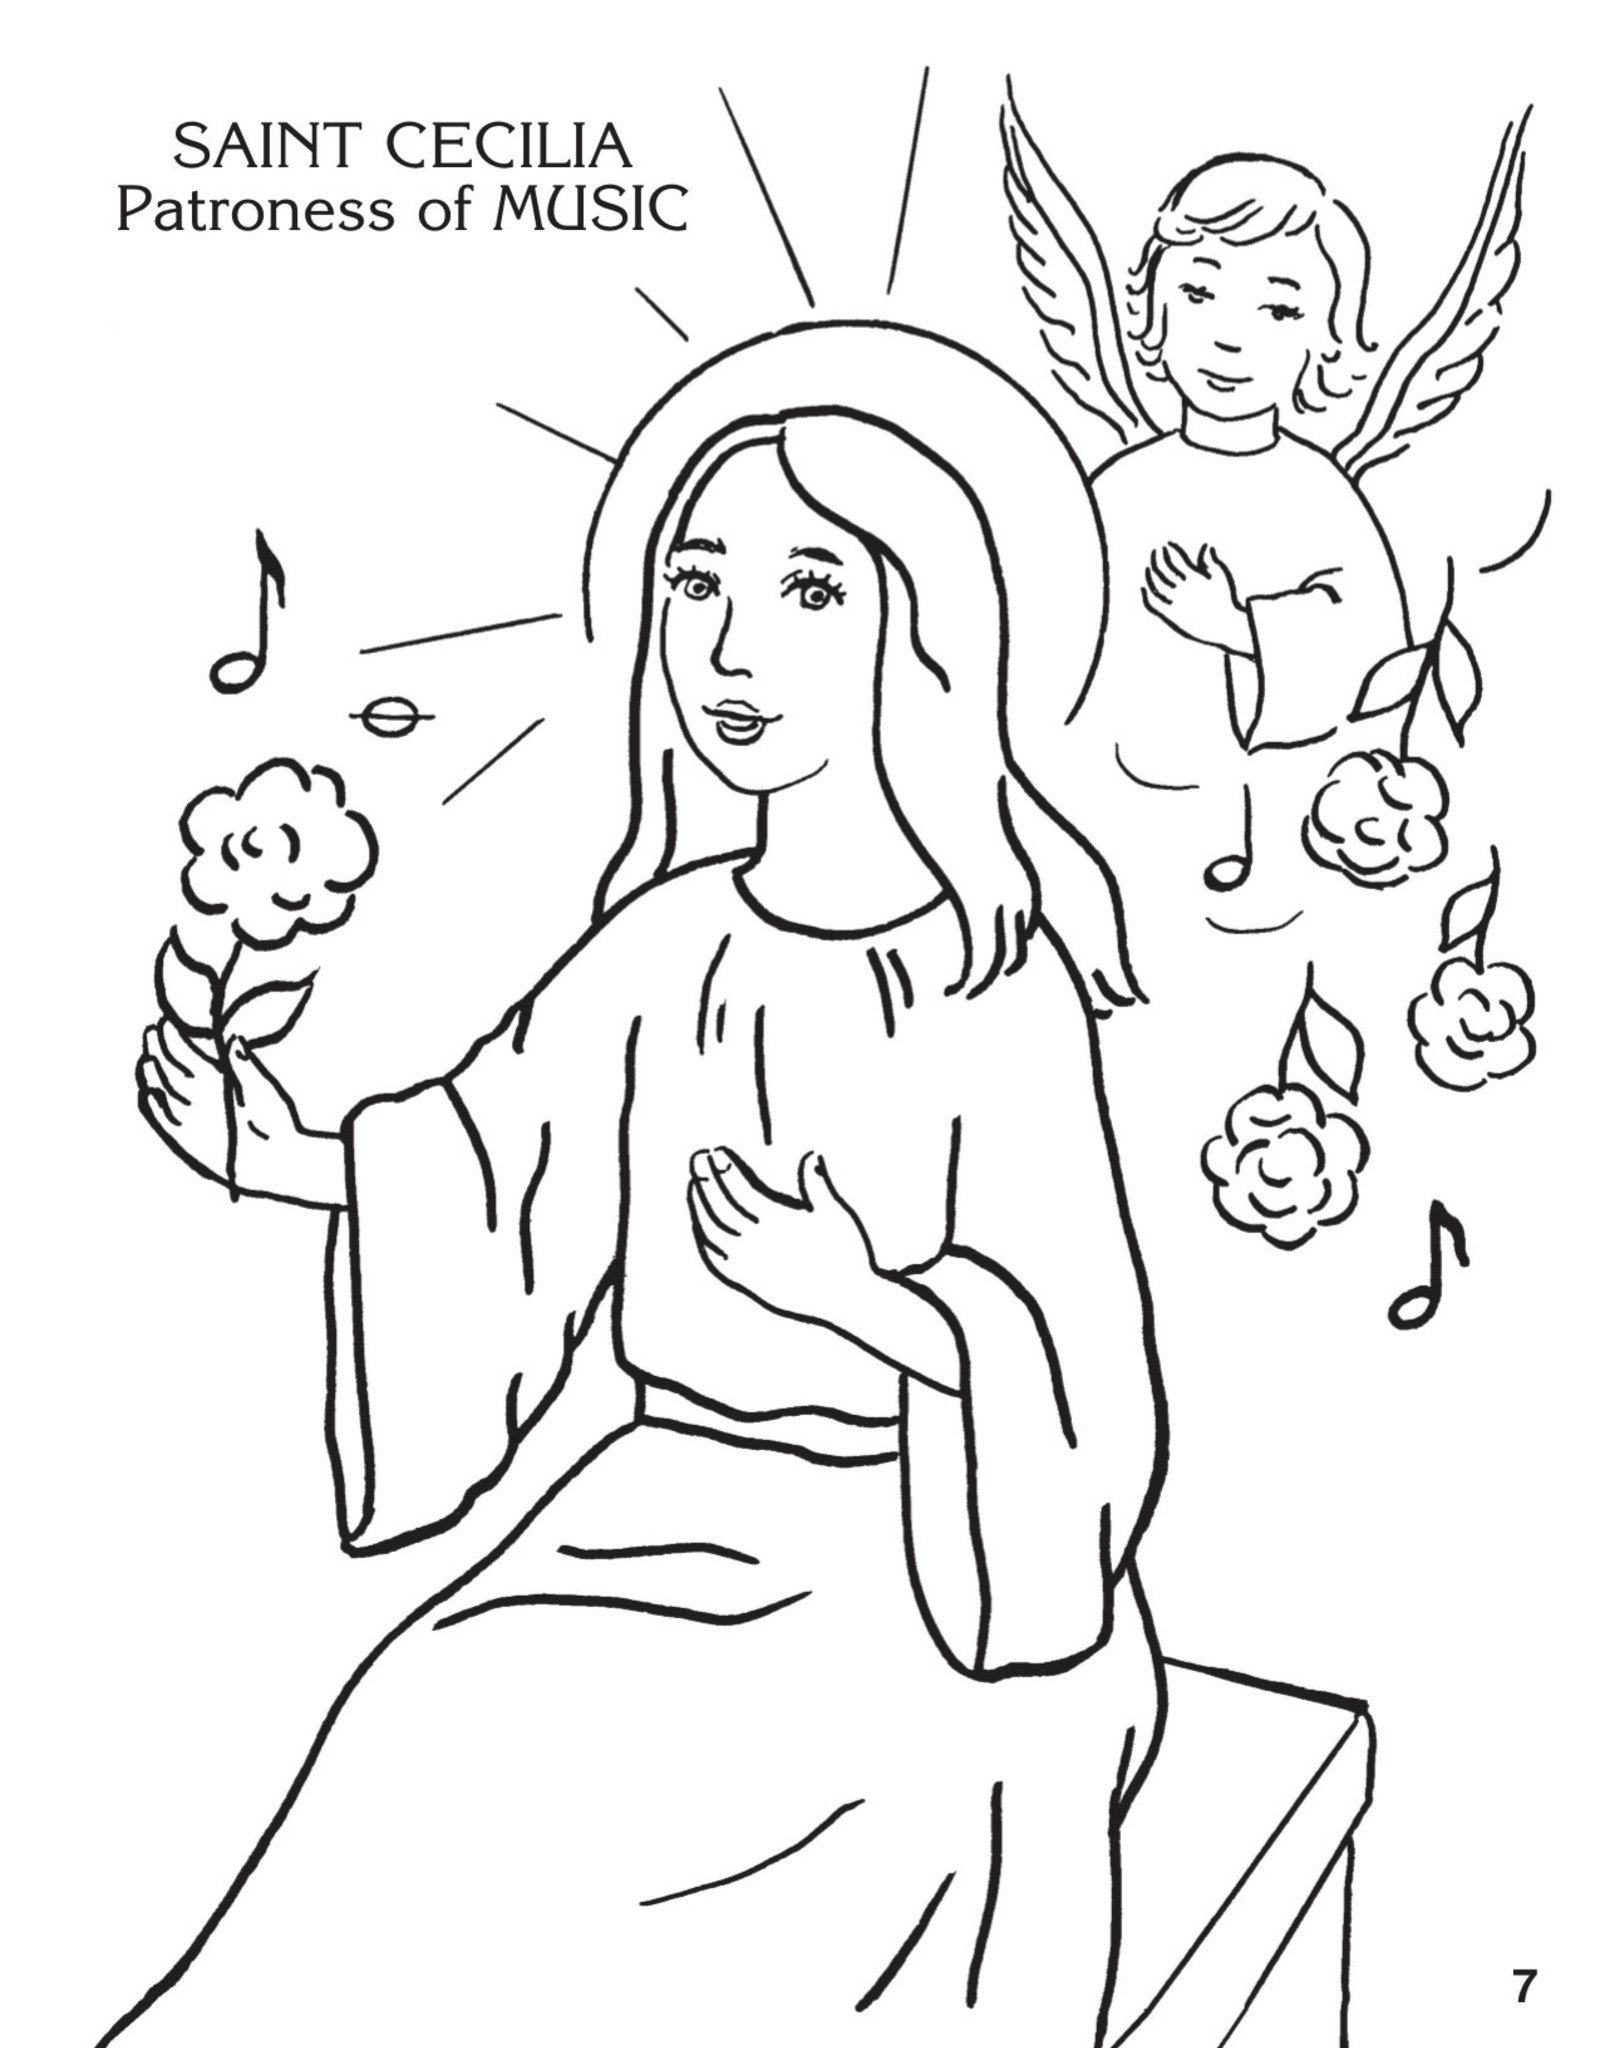 Catholic Book Publishing Coloring Book About the Saints, by Emma McKean